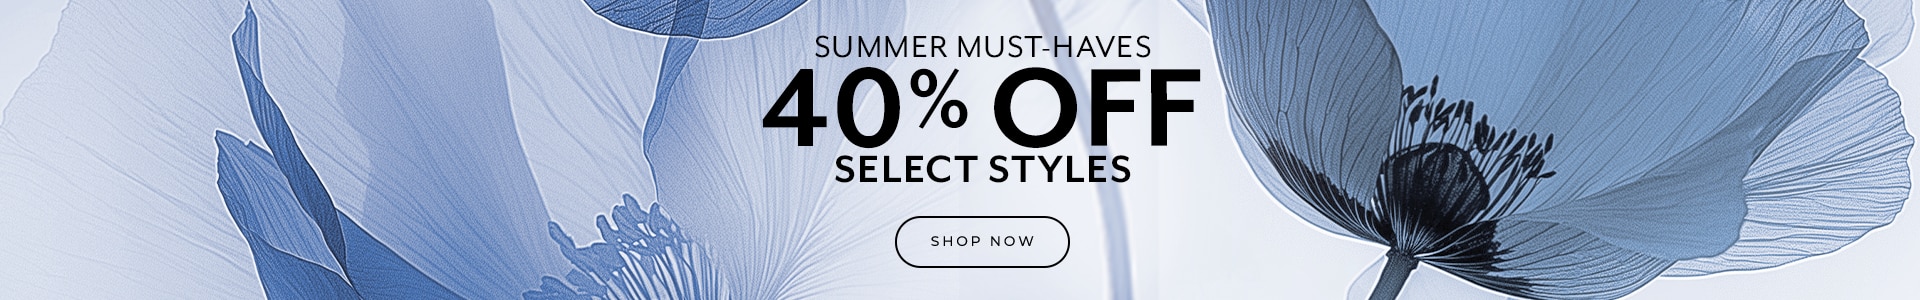 New Summer Must Haves sale